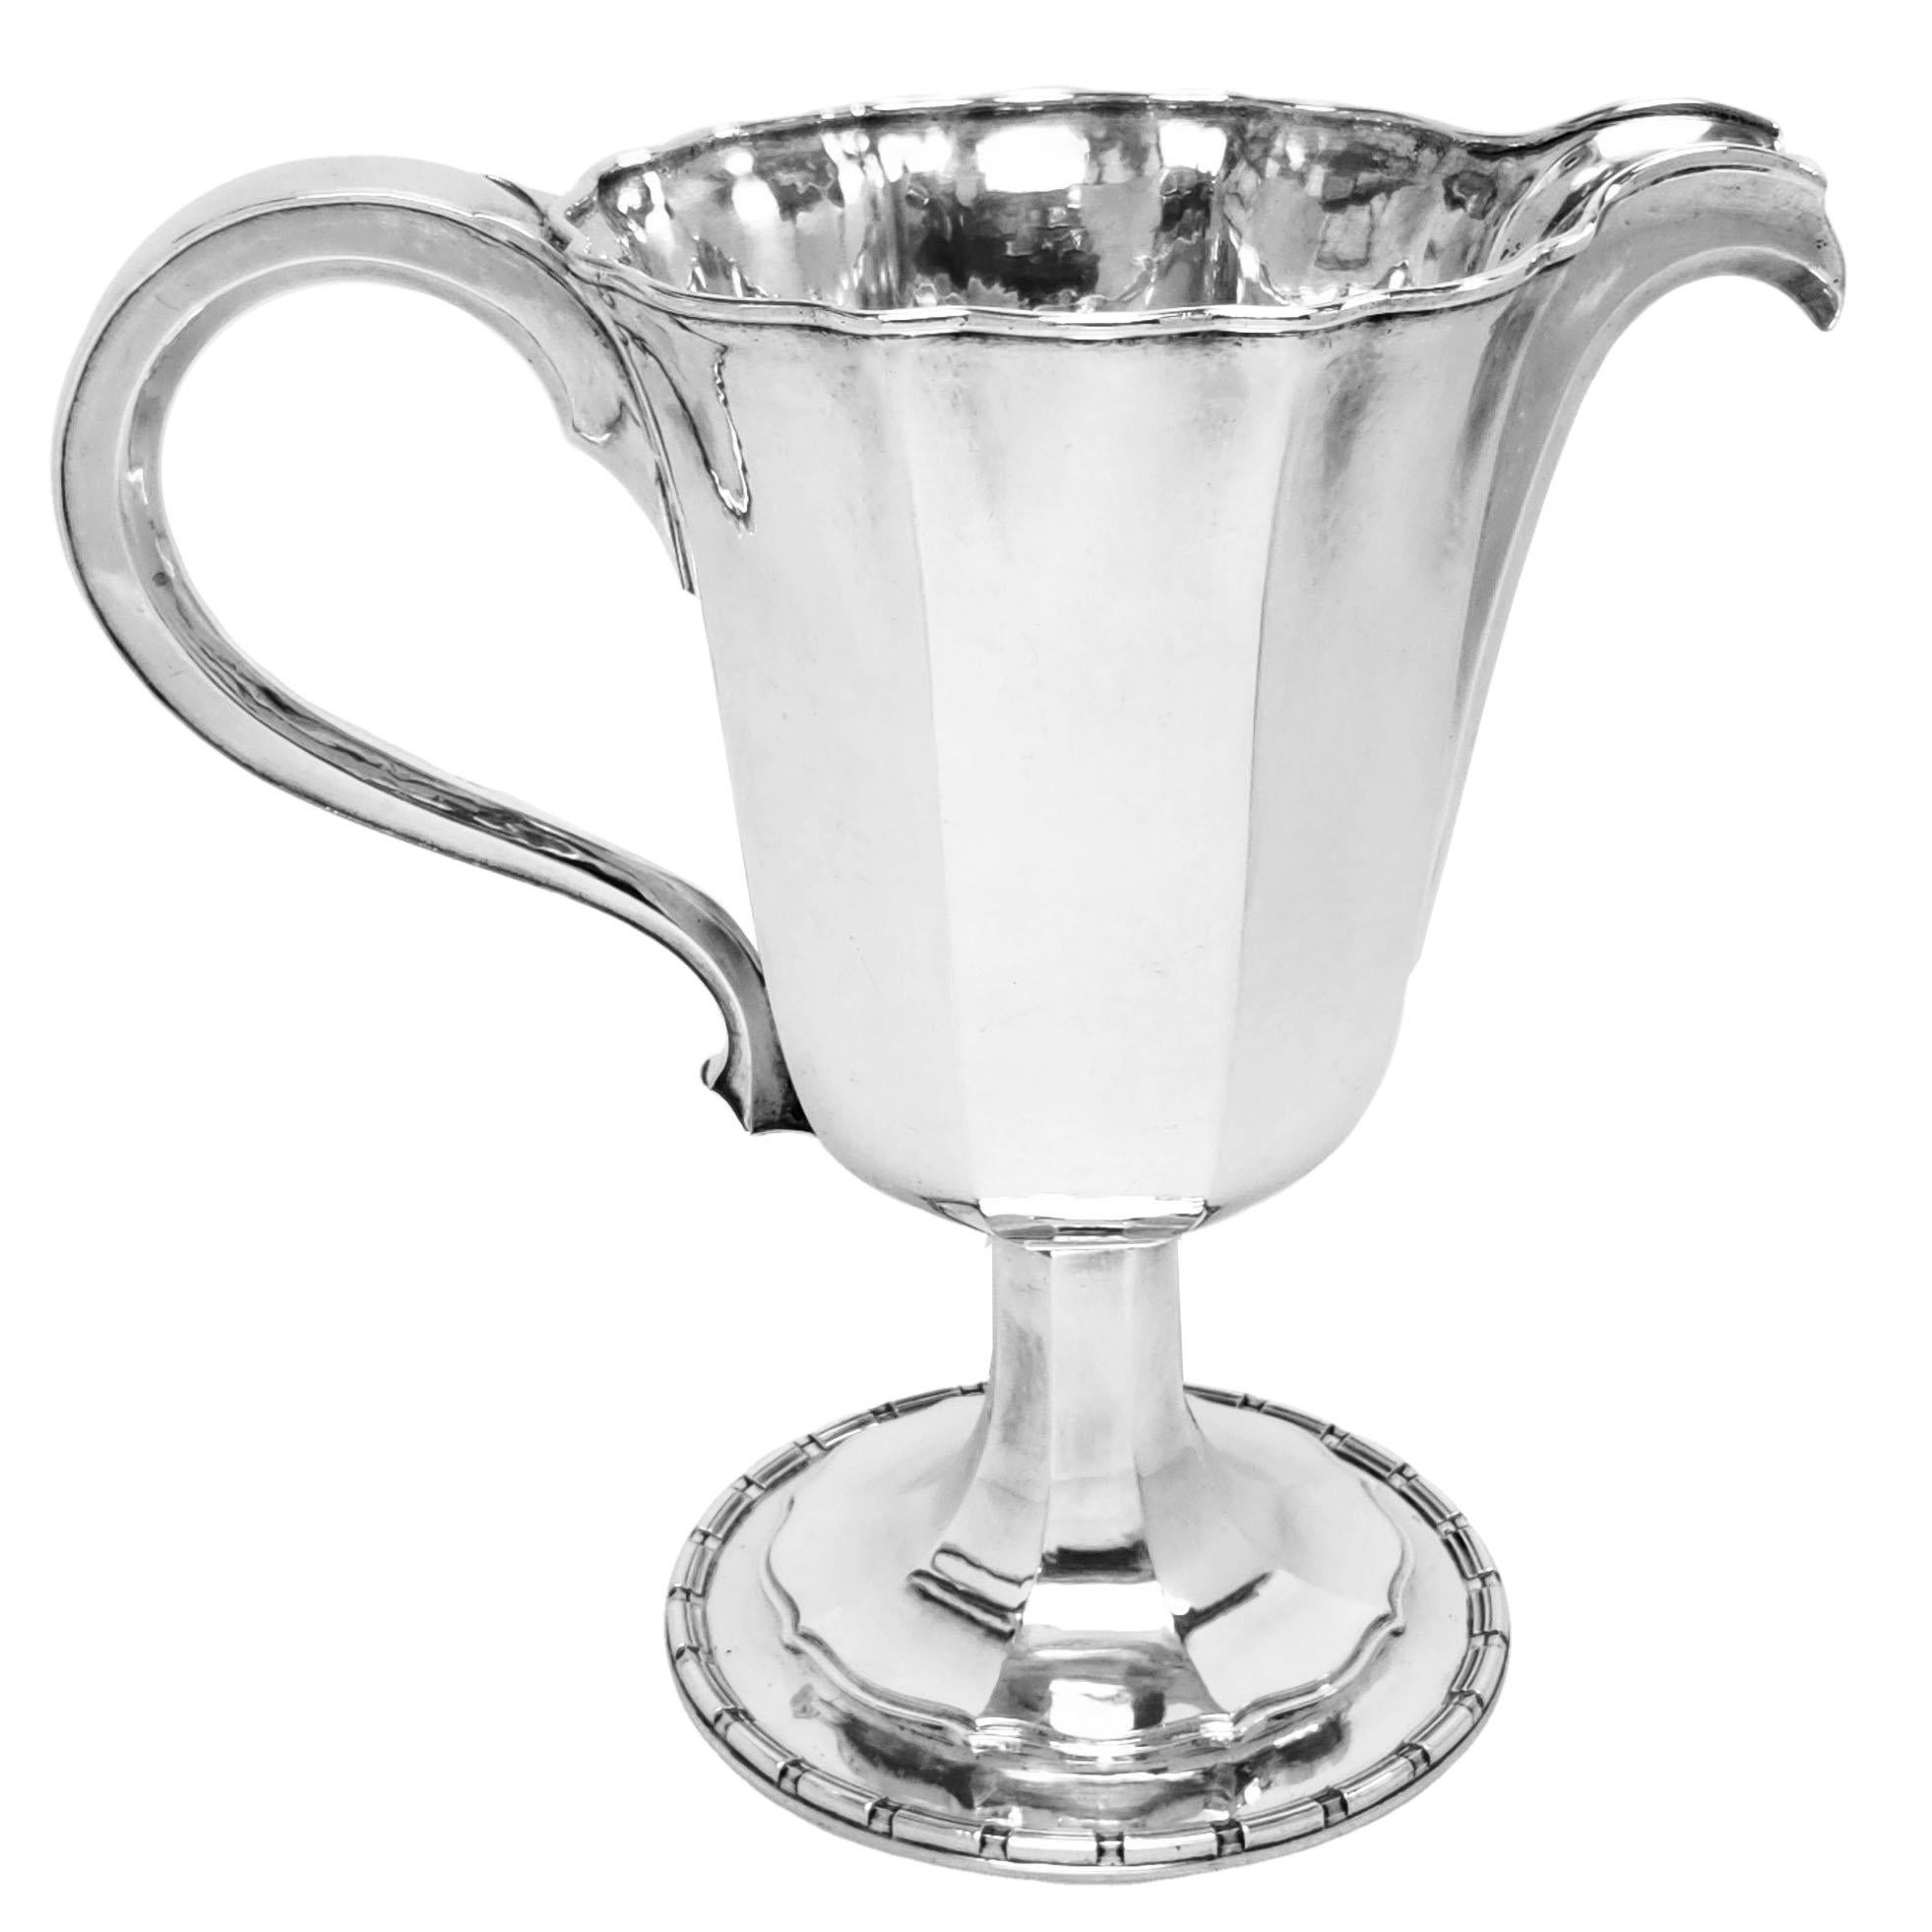 A substantial Sterling Silver Jug by Omar Ramsden. This Silver Arts & Crafts style Silver Pitcher has an Octagonal Body on an unusual shaped spread foot. The Silver Serving Jug is of a large size and suitable as a water or cocktail pitcher.

Made in